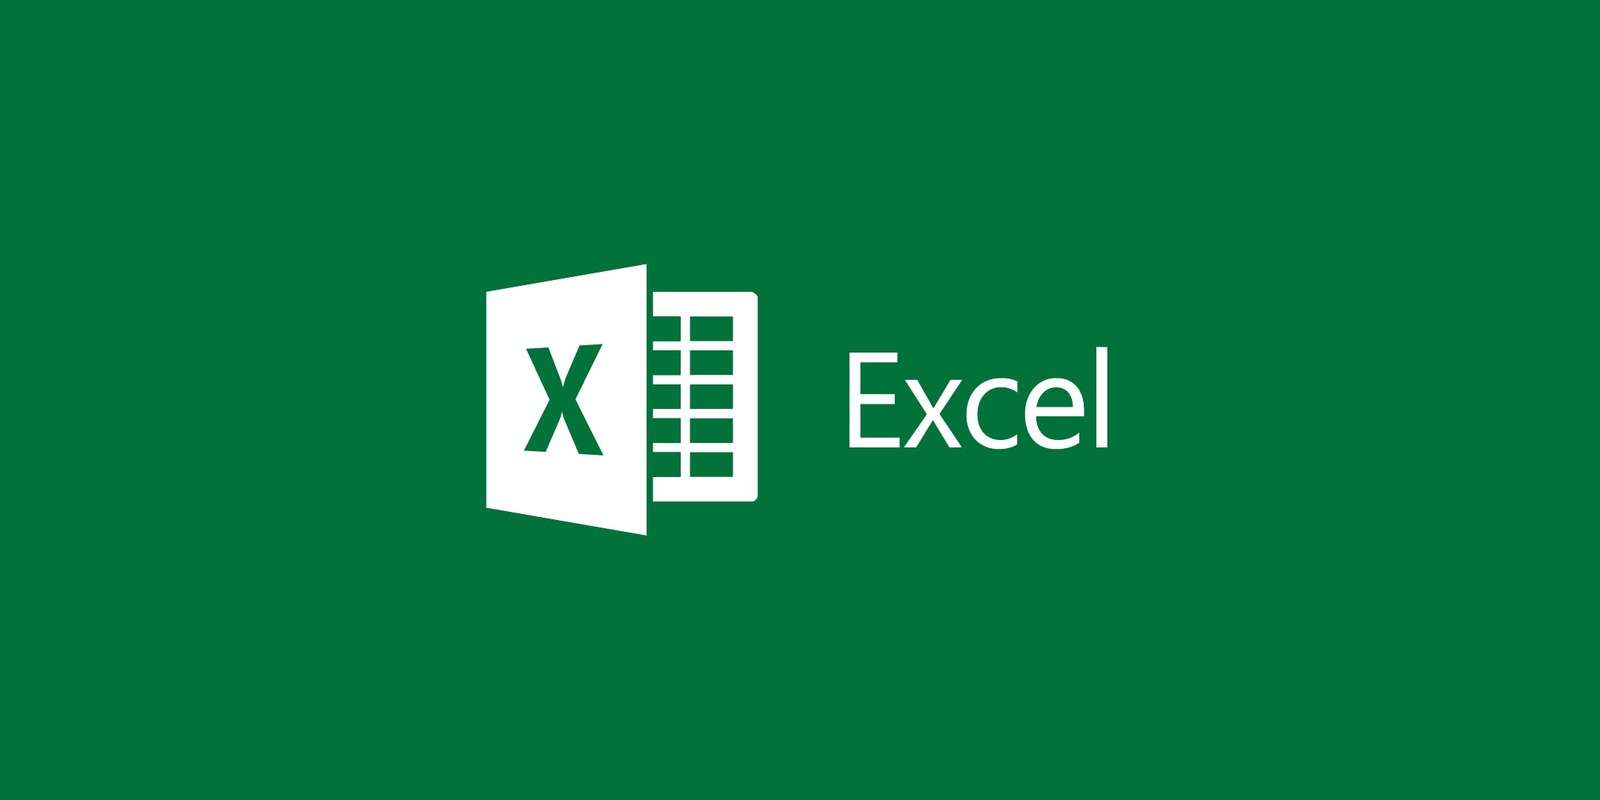 How To Export Data From Website To Excel